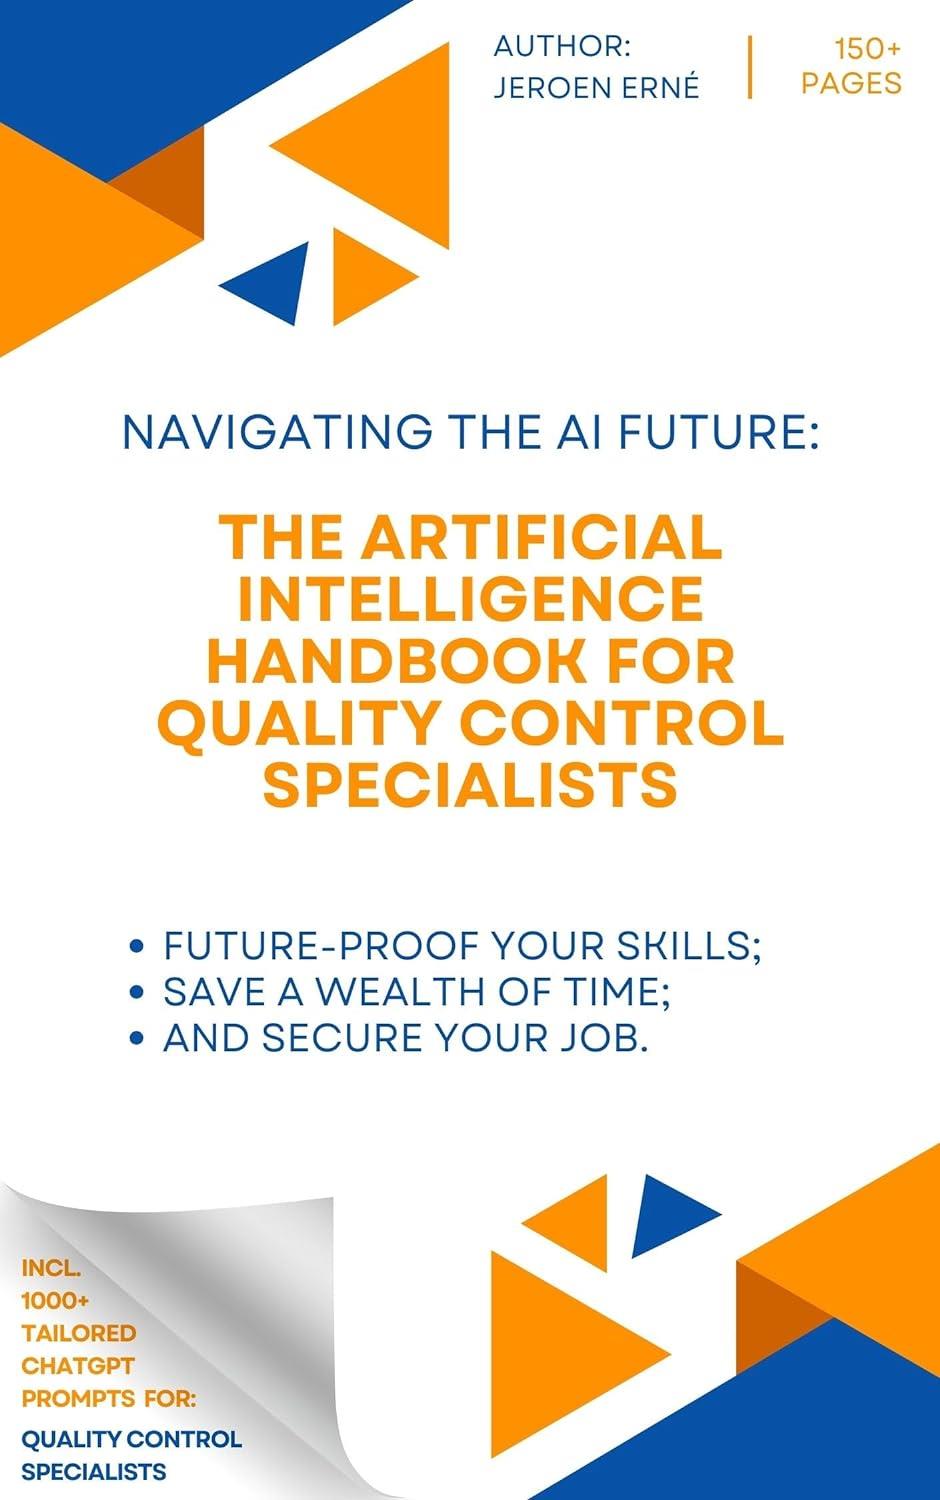 The Artificial Intelligence Handbook for Quality Control Specialists